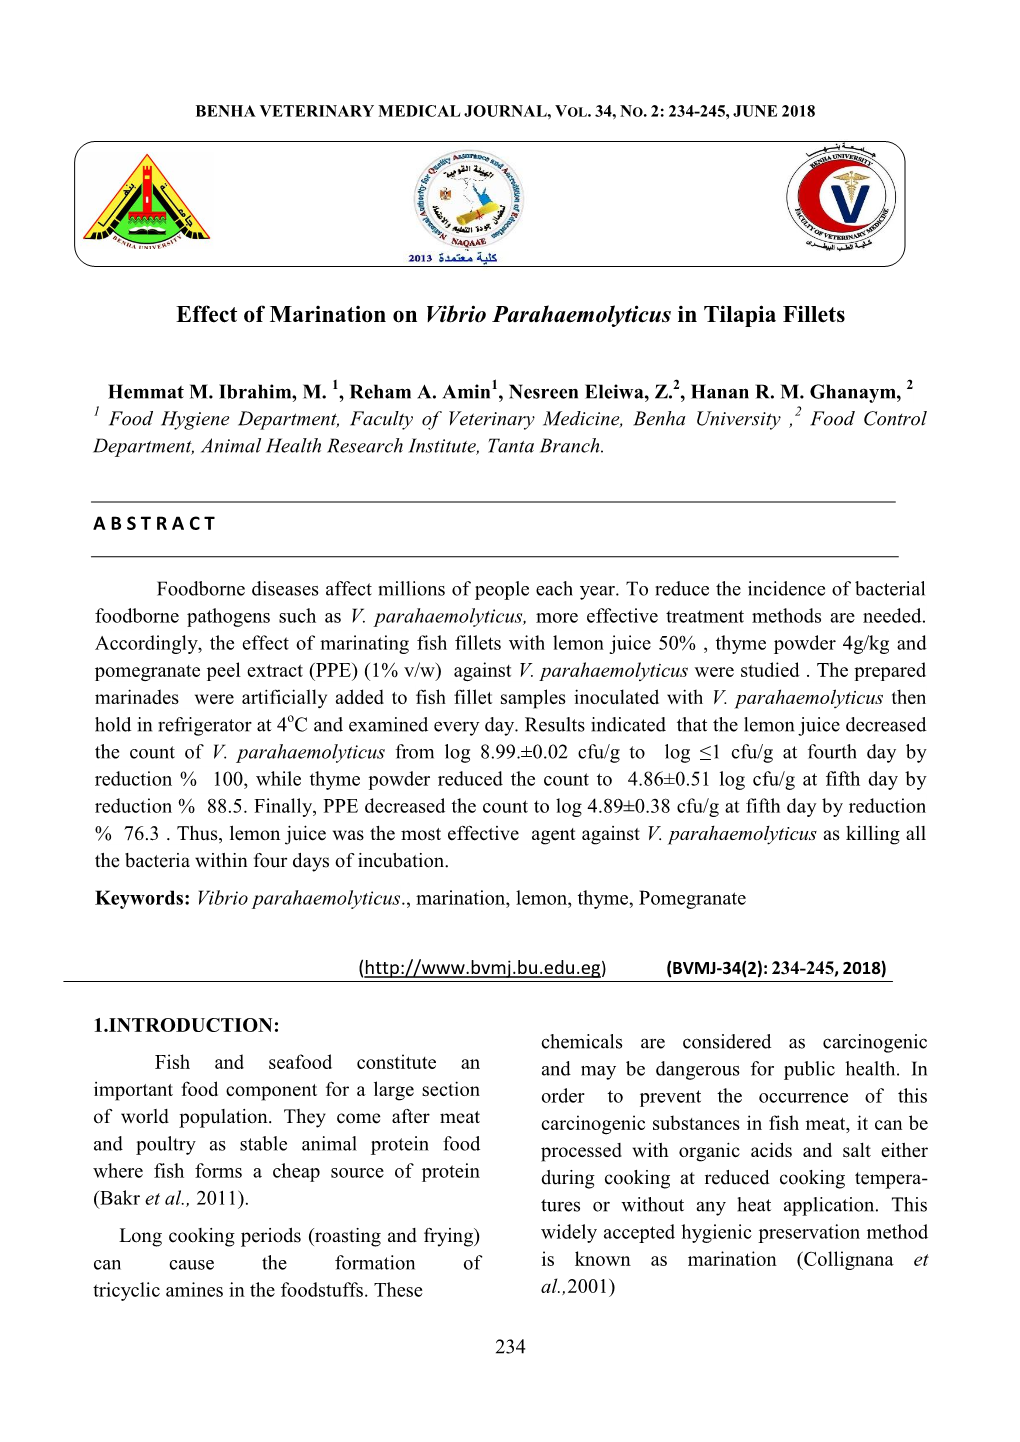 Effect of Marination on Vibrio Parahaemolyticus in Tilapia Fillets